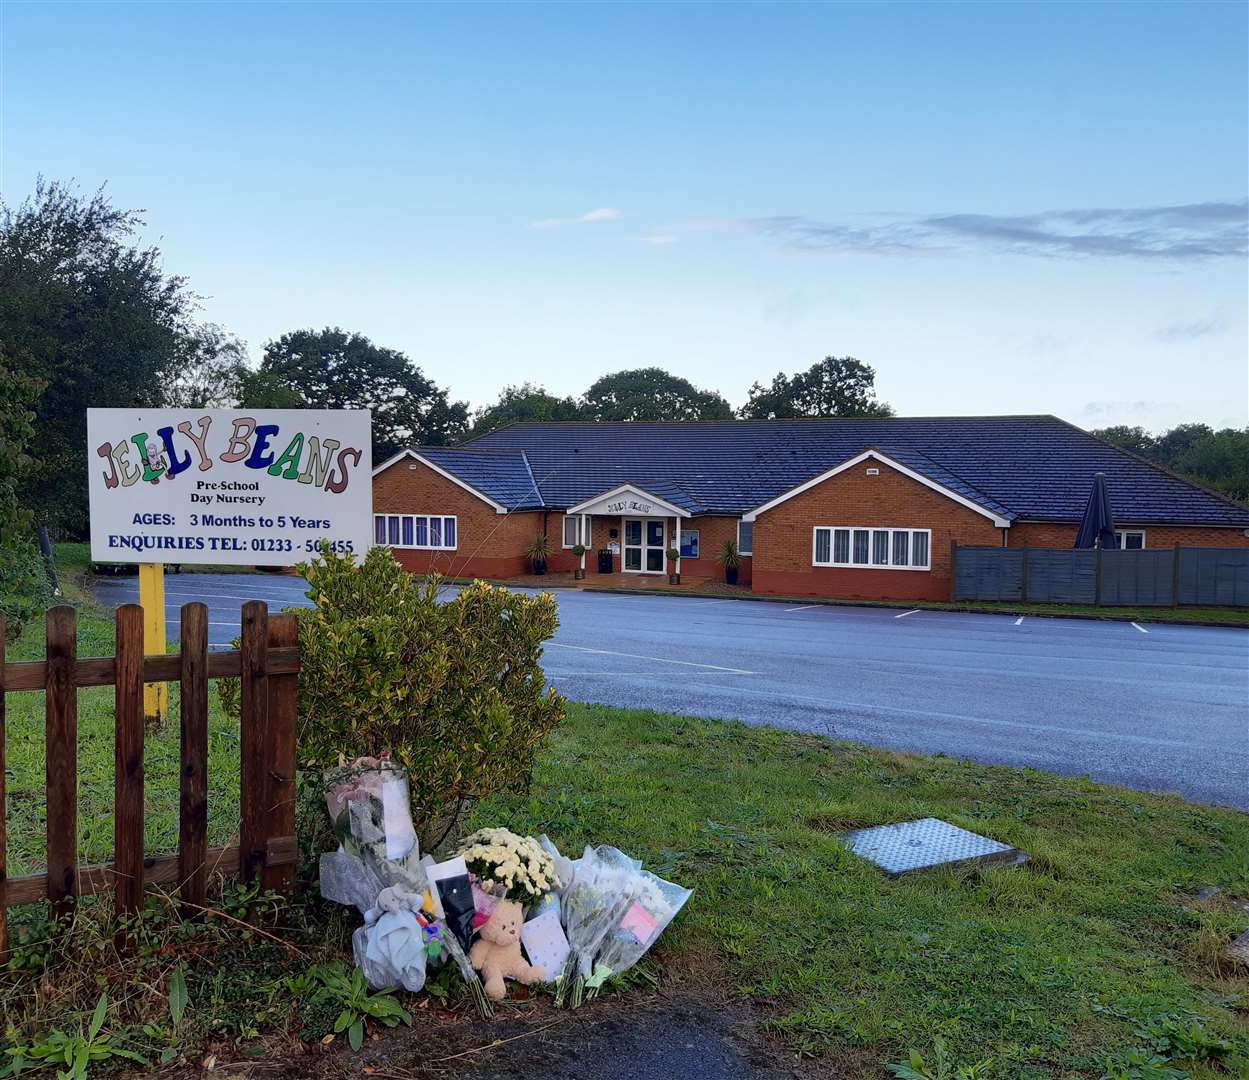 Jelly Beans nursery in Kingsnorth closed down after the death of Oliver Steeper